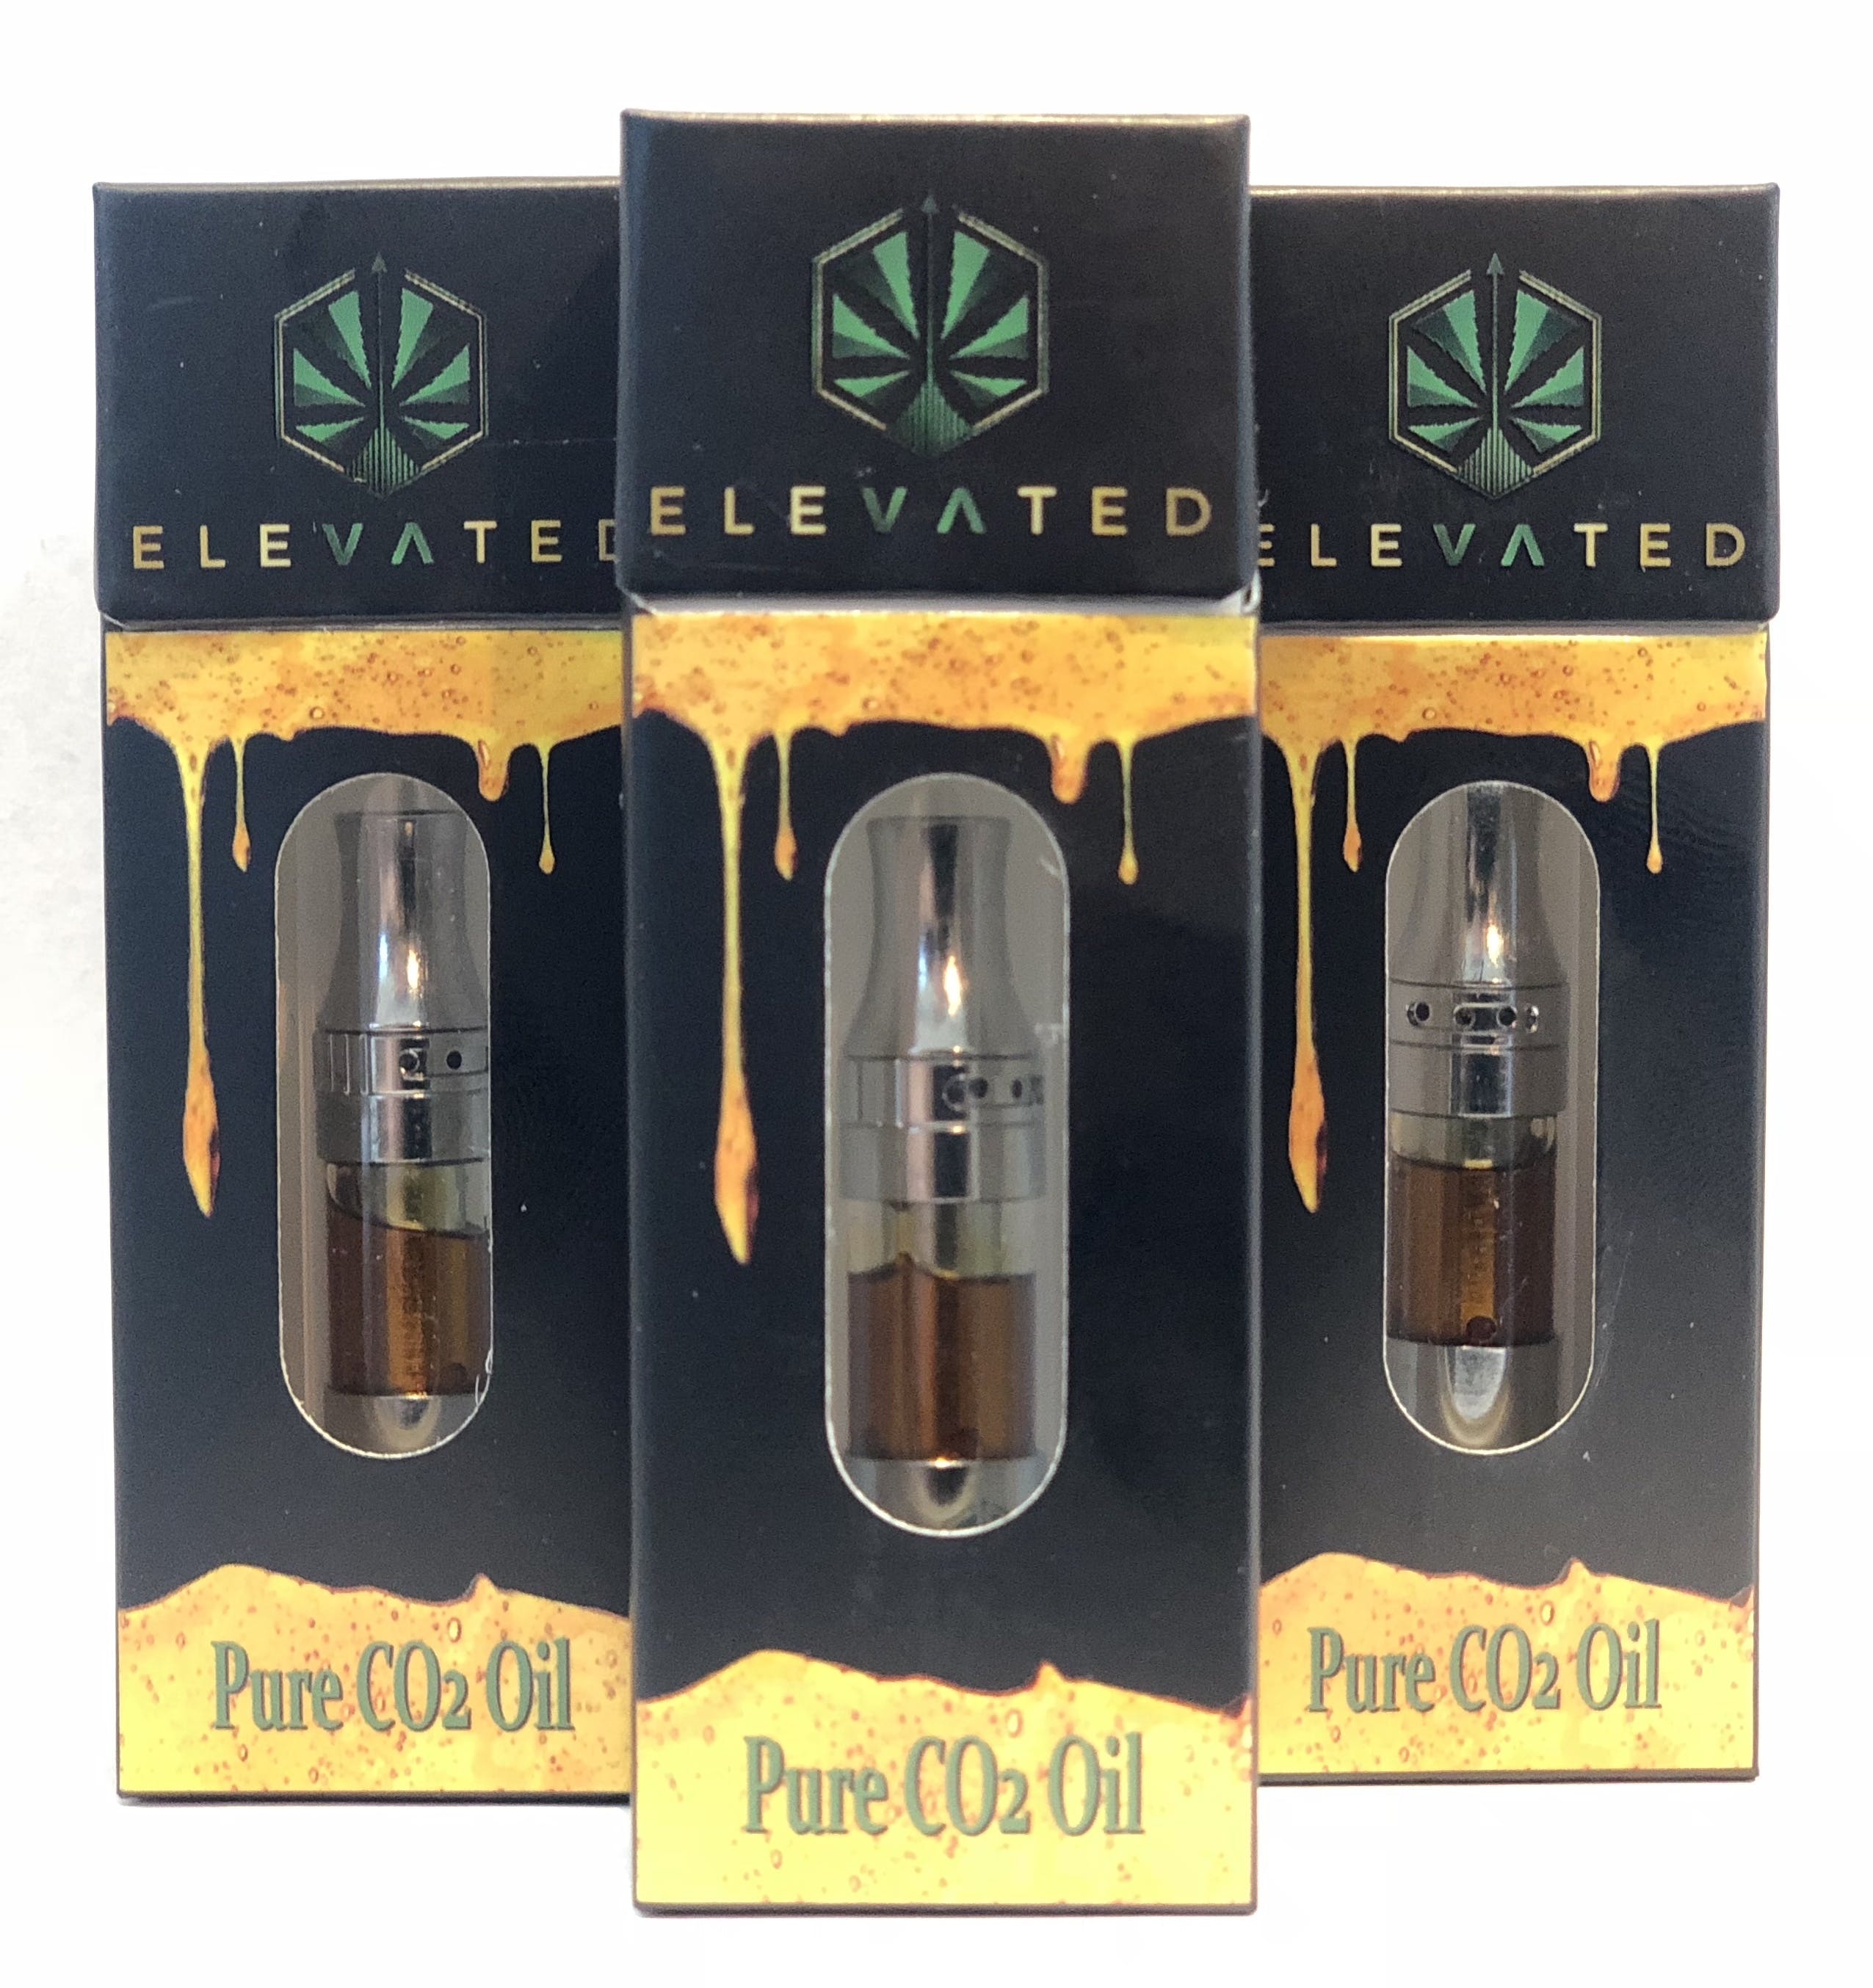 concentrate-elevated-cartridge